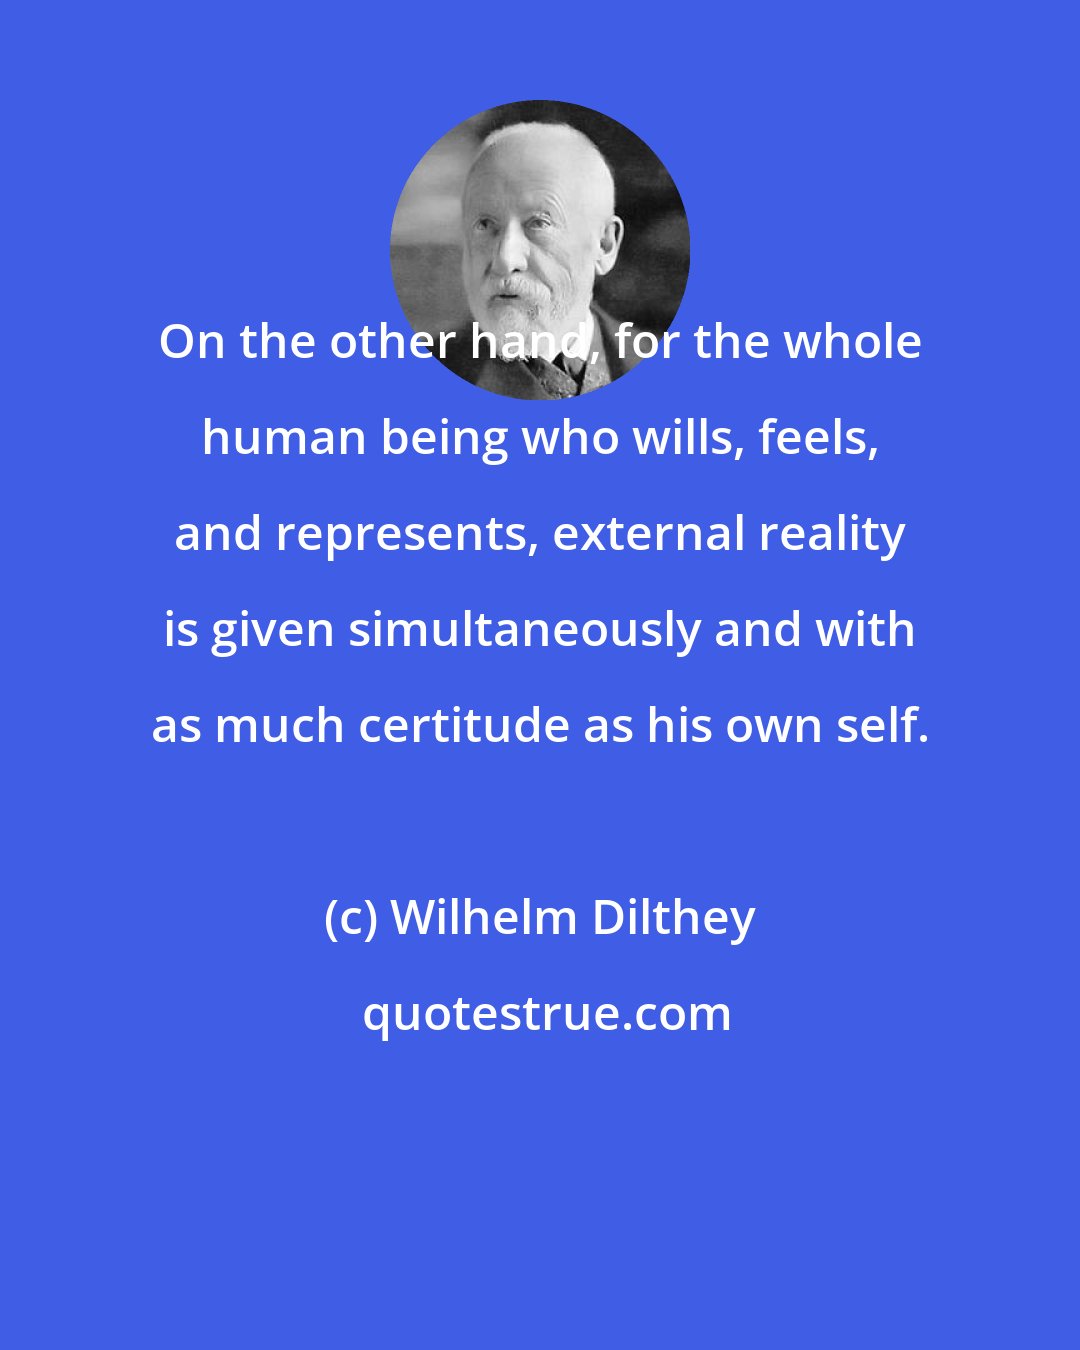 Wilhelm Dilthey: On the other hand, for the whole human being who wills, feels, and represents, external reality is given simultaneously and with as much certitude as his own self.